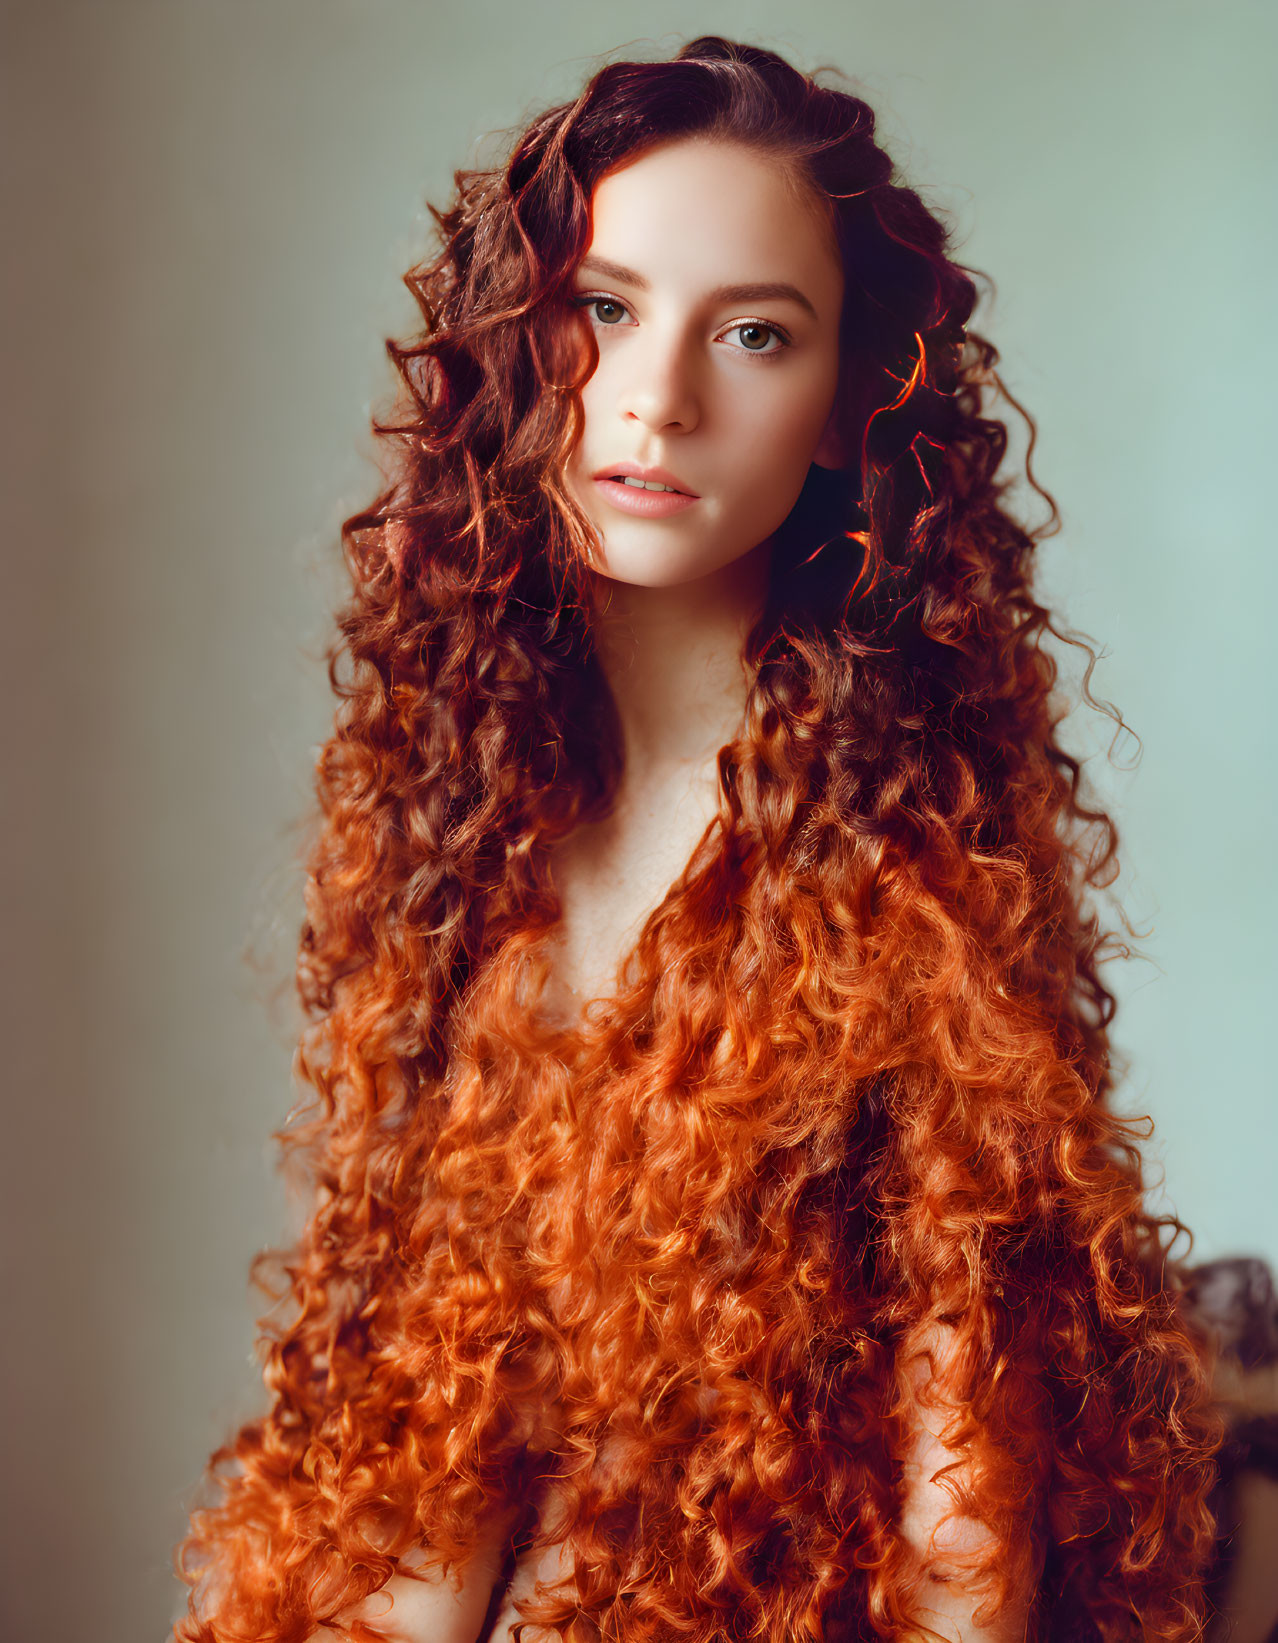 Portrait of a Young Woman with Long Curly Red Hair